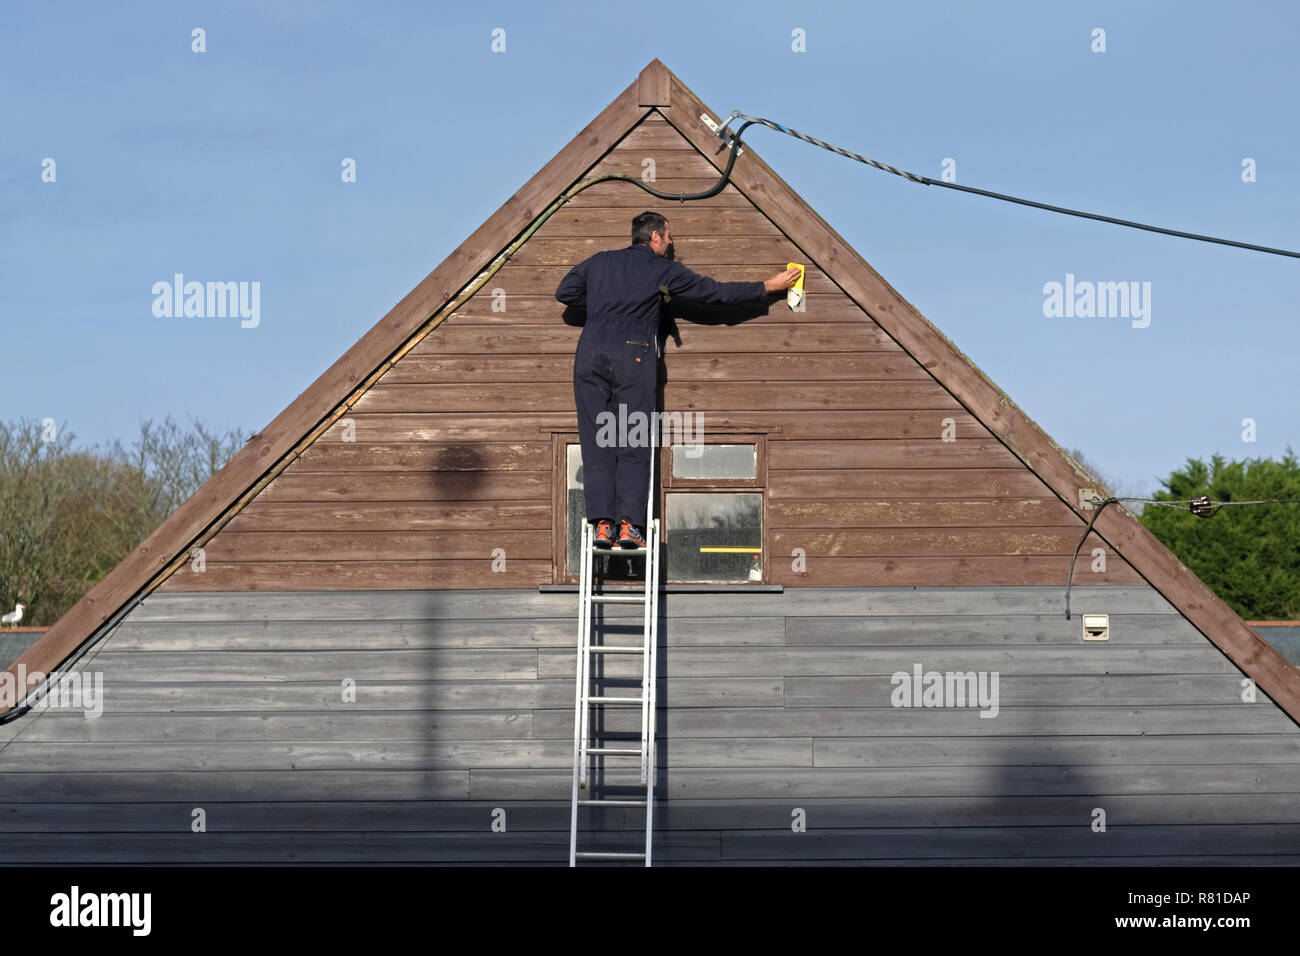 A carpenter, decorator, sanding down the exterior woodwork of a building. Stock Photo